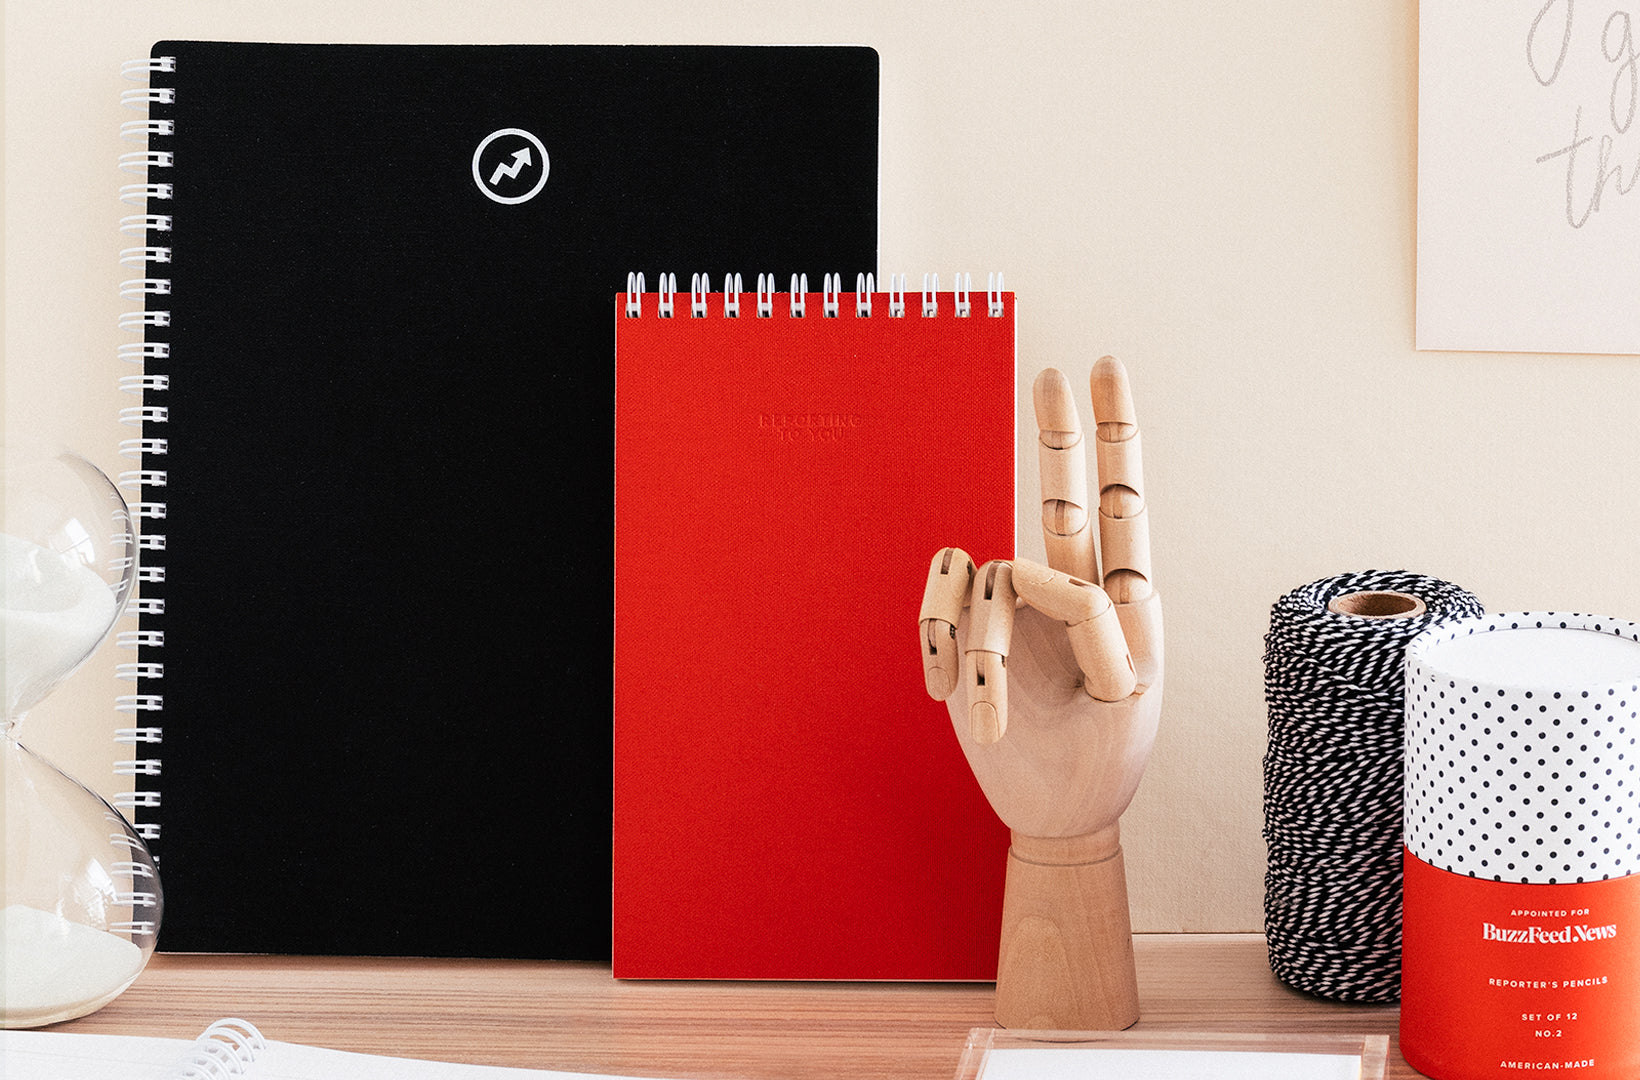 The Appointed for BuzzFeed News Notebook, Reporter's Notepad, and Pencil Set sit on a desk with a wood hand desk accessory making a peace sign.